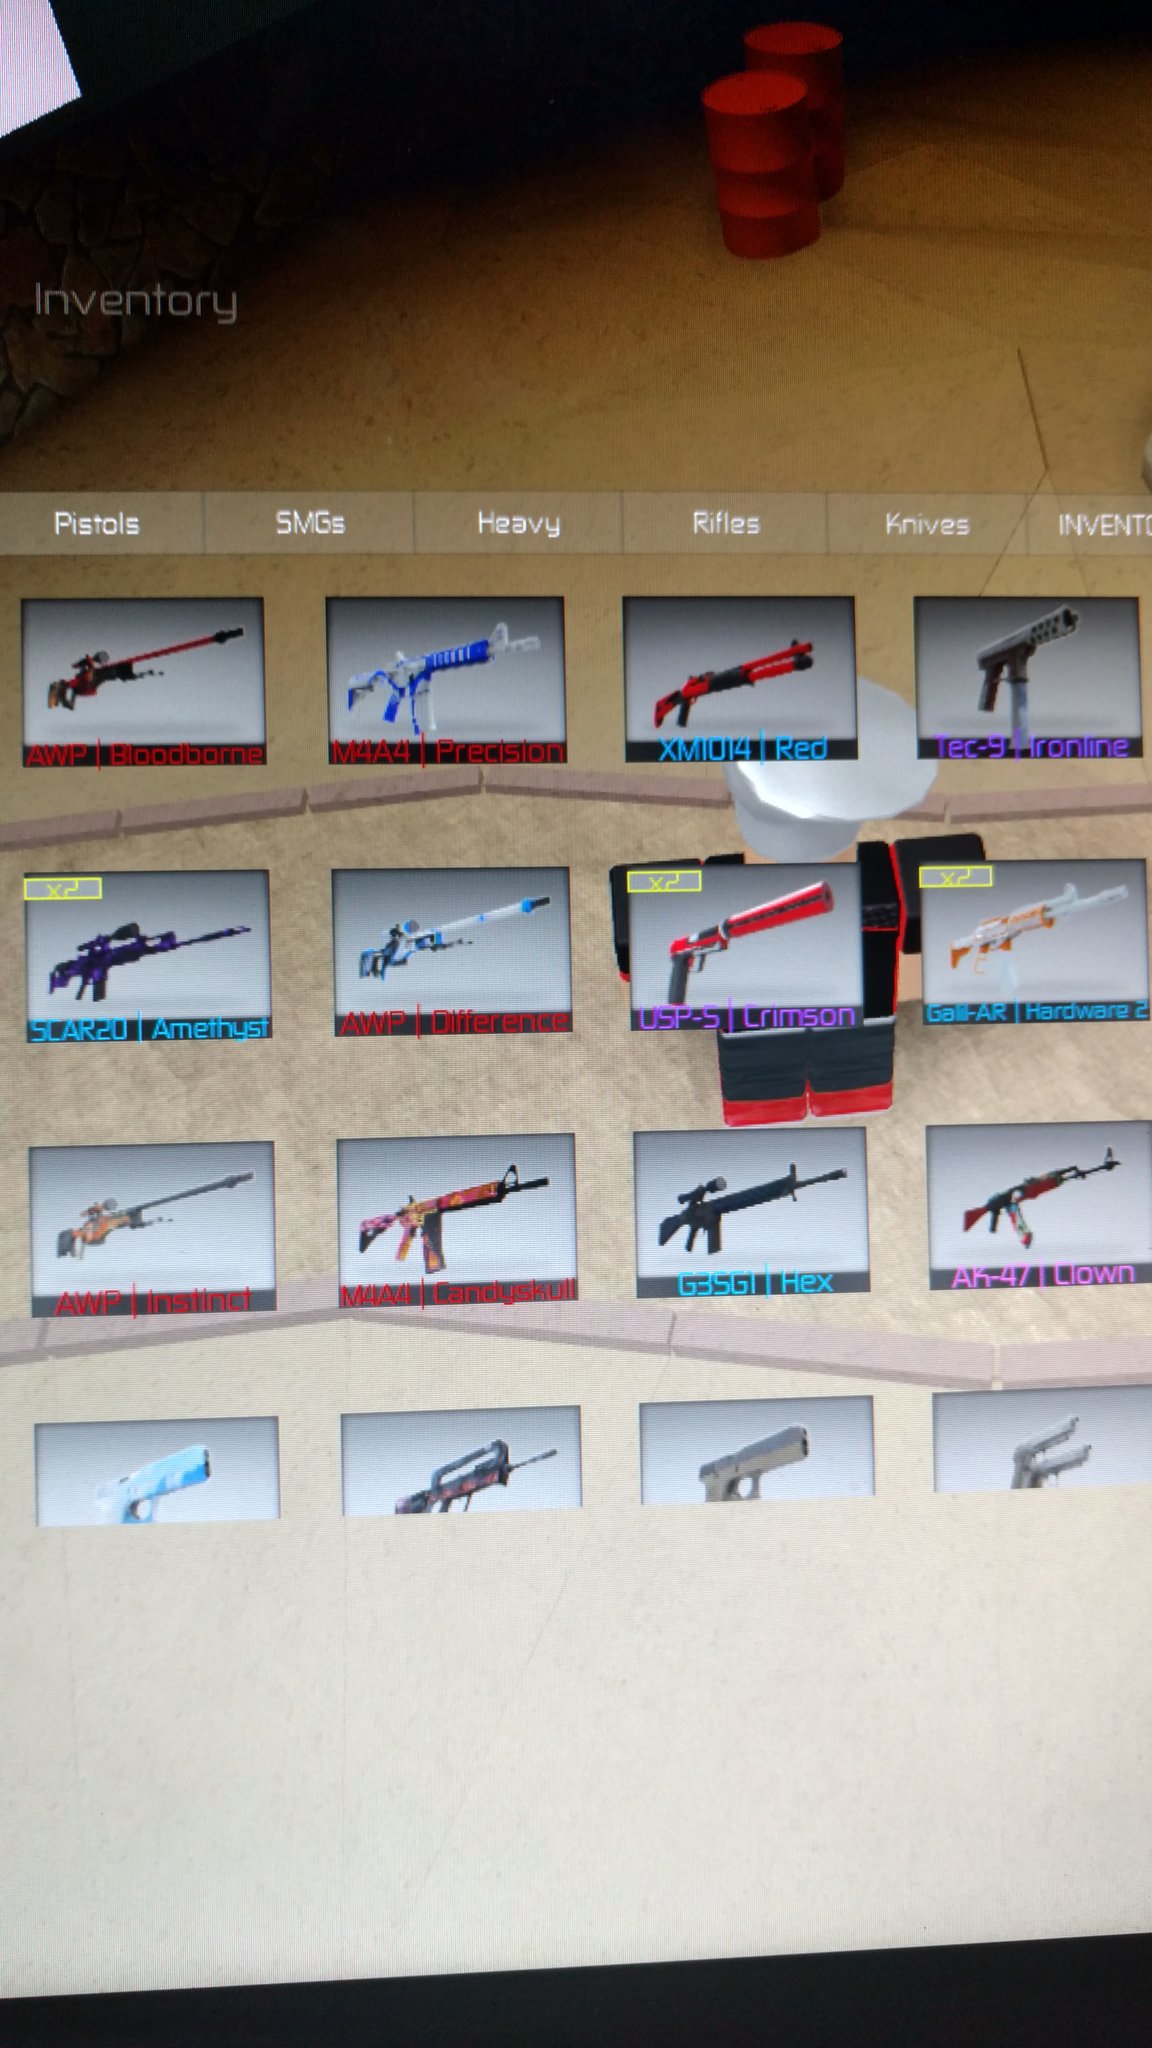 Syncridge On Twitter Trading Whole Inventory For Low Demand Stock Knife Roblox Counterbloxrobloxoffensive Cbro Counterblox - cbro designs roblox